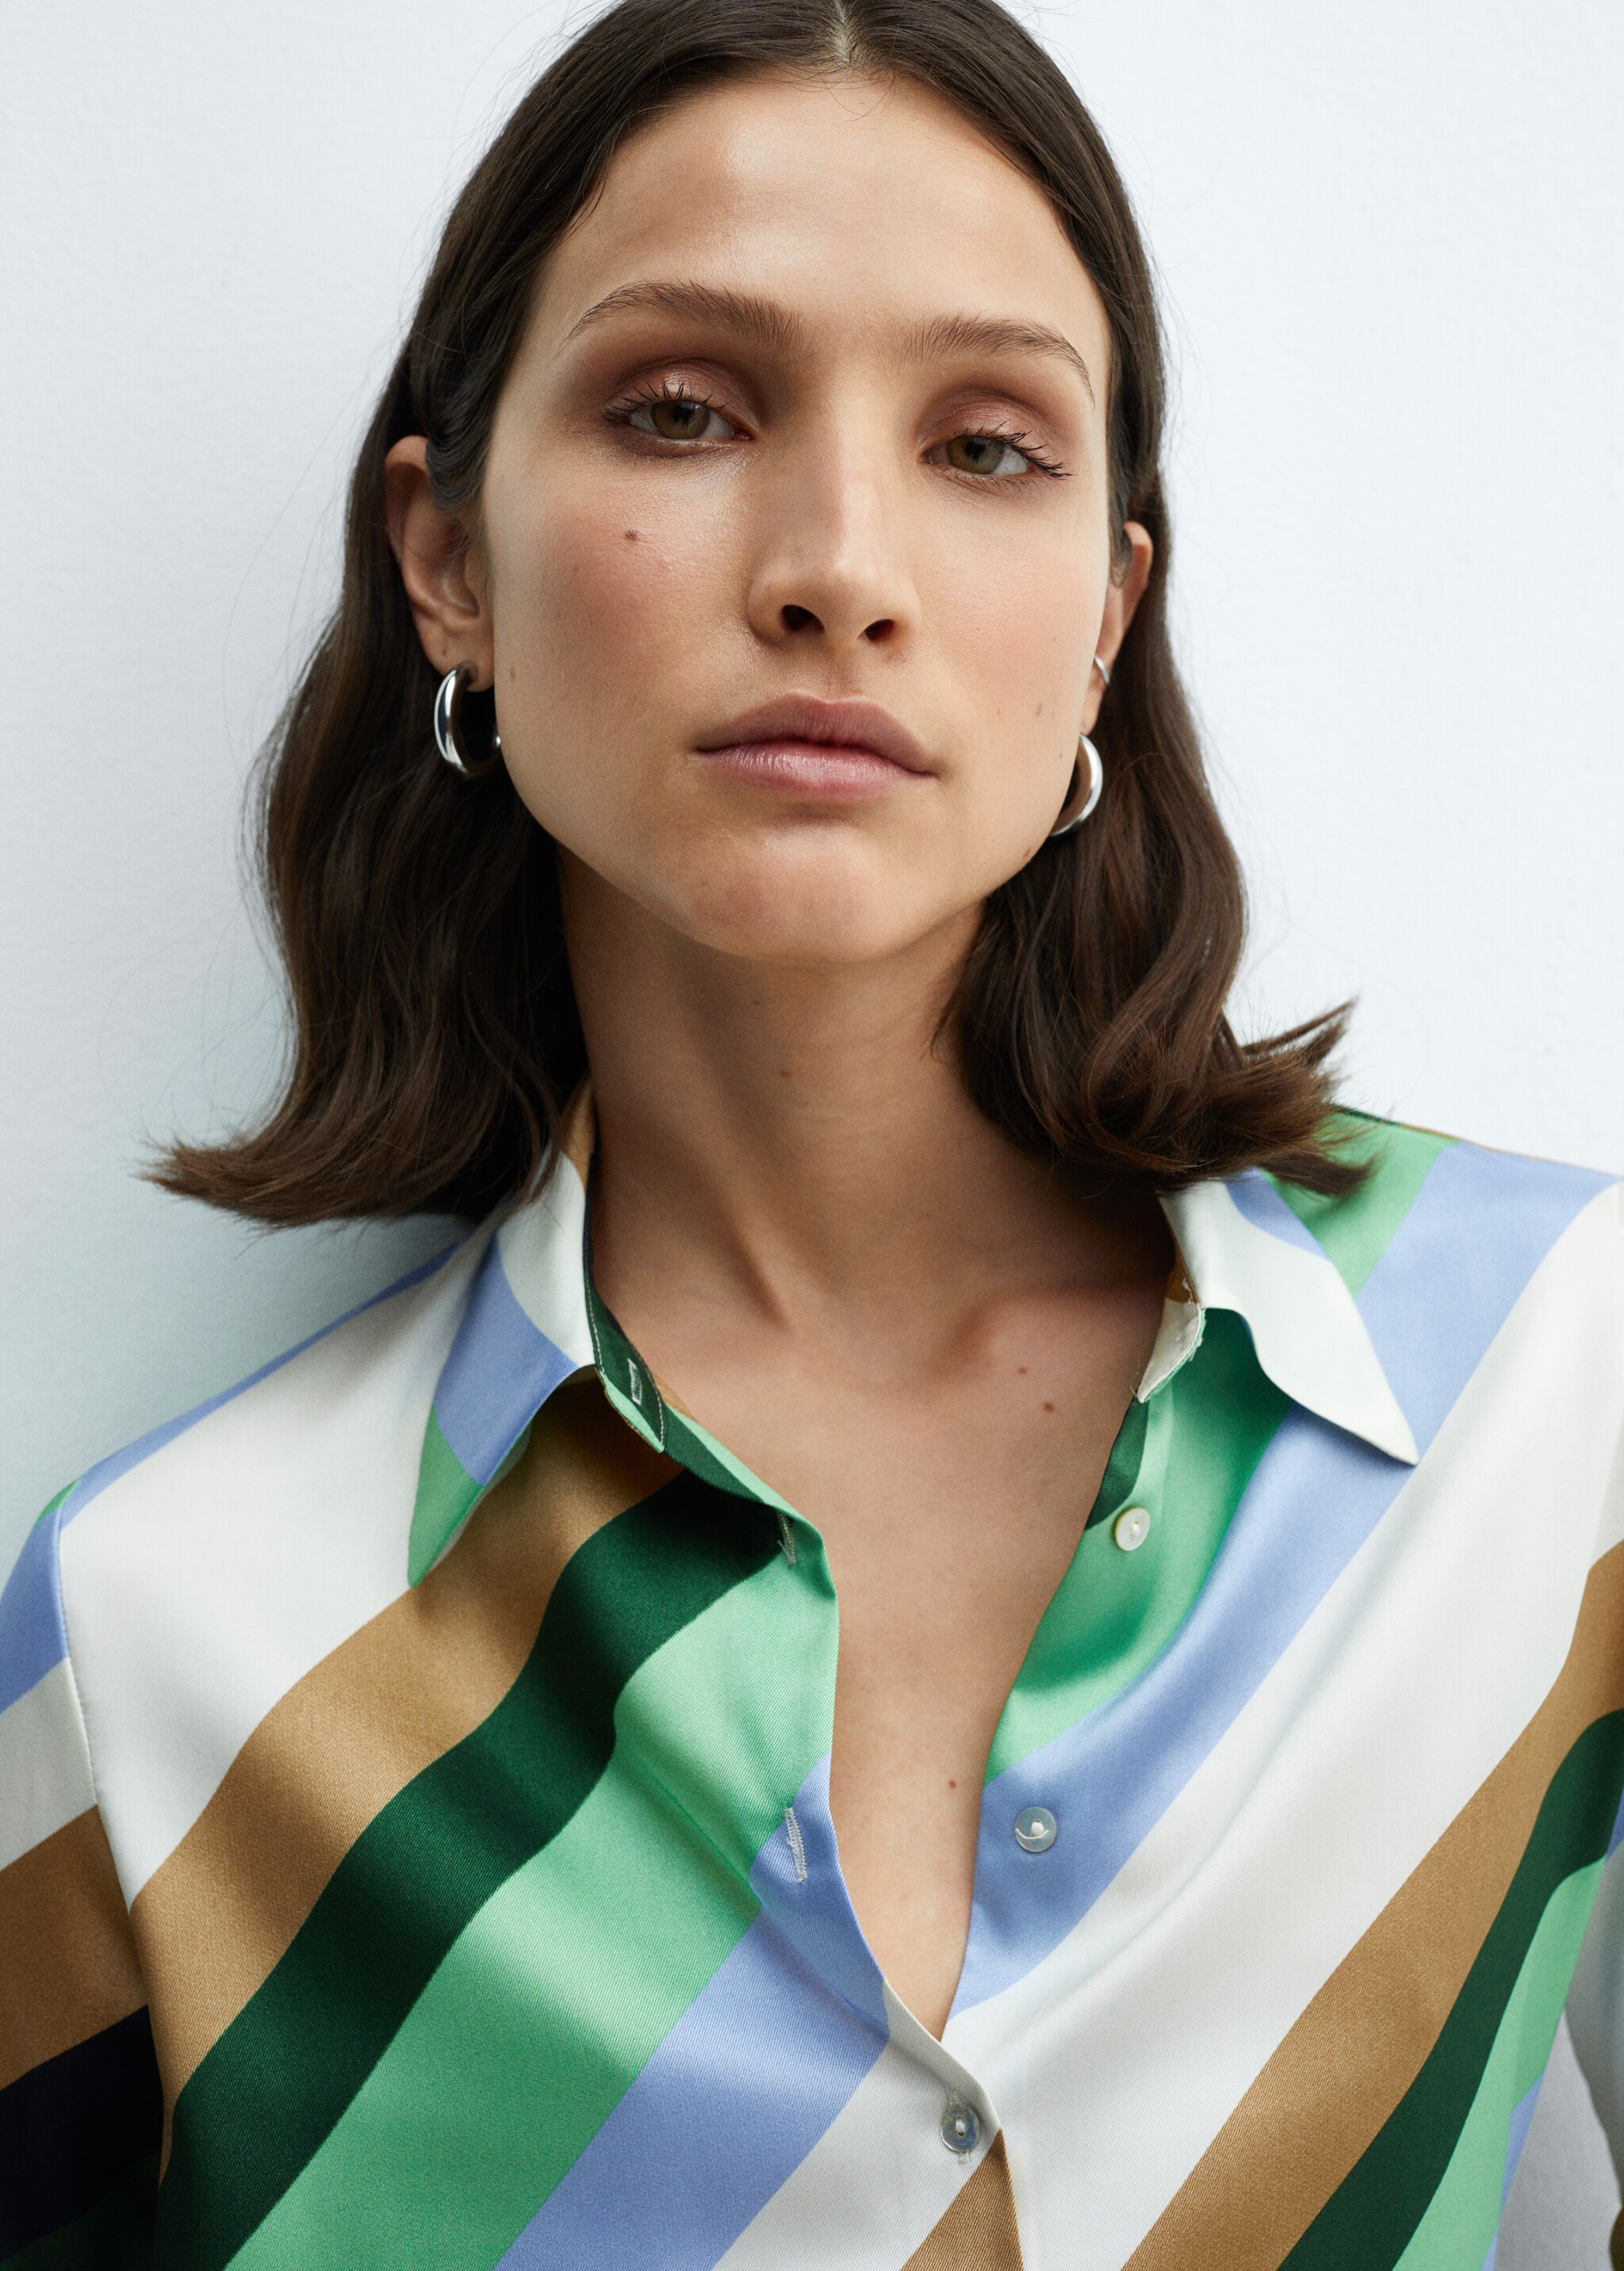 Satin striped shirt - Details of the article 1